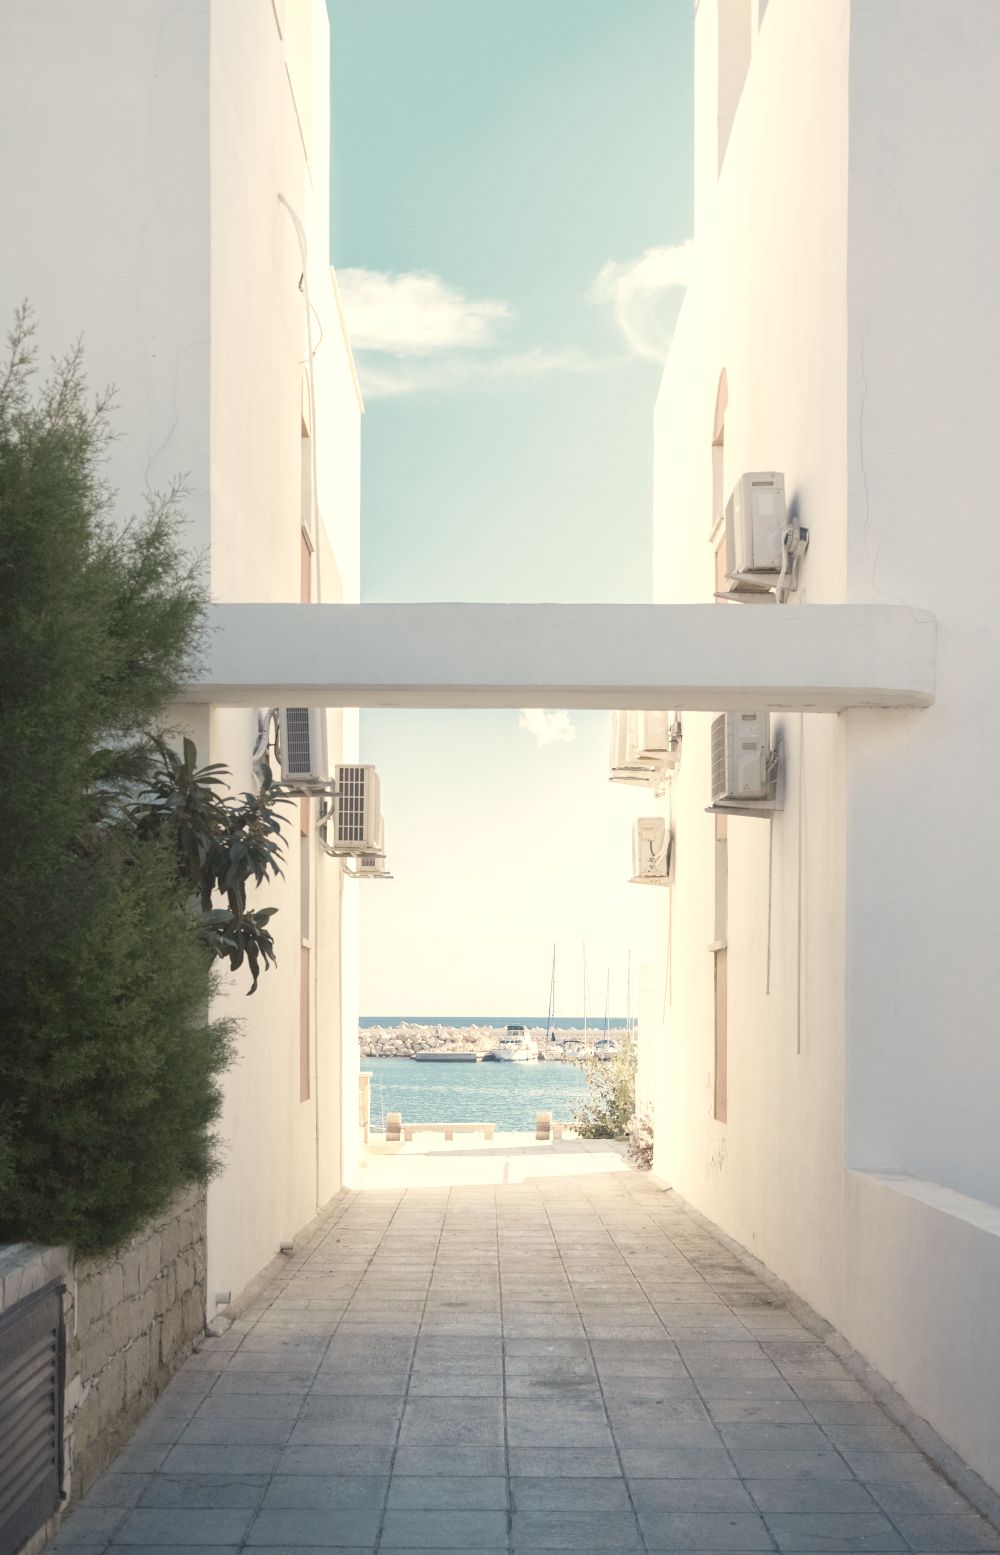 Narrow walls with small path to ocean to represent depression